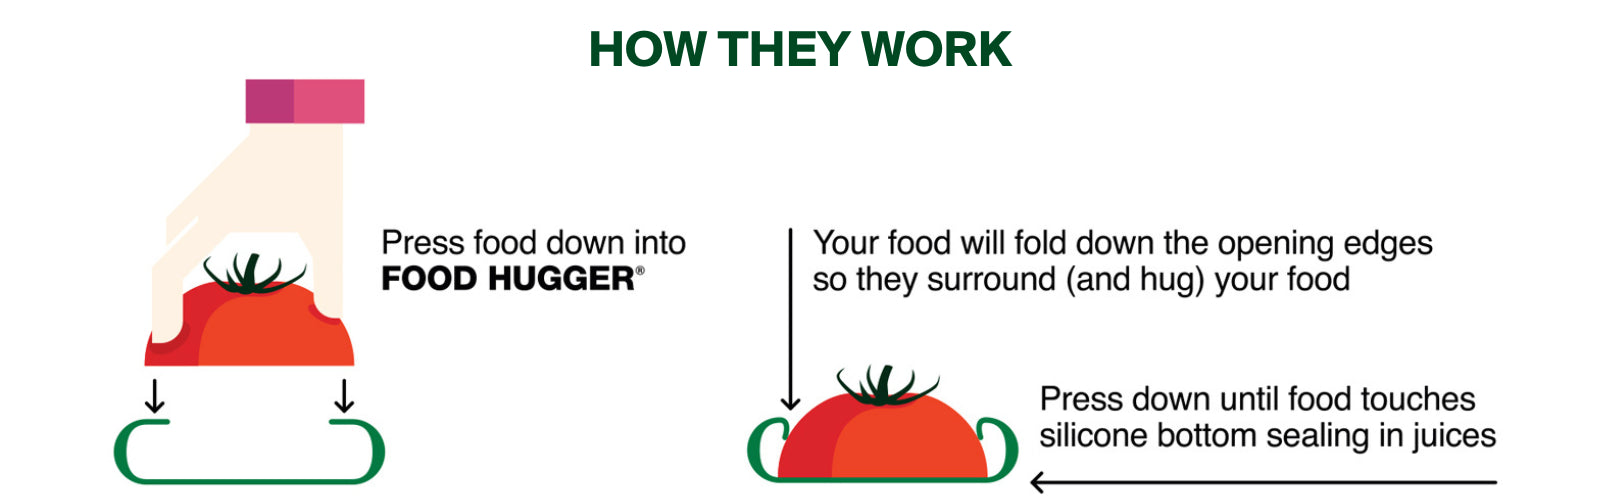 How they work. Tutorial on how to use Food Huggers to preserve food.